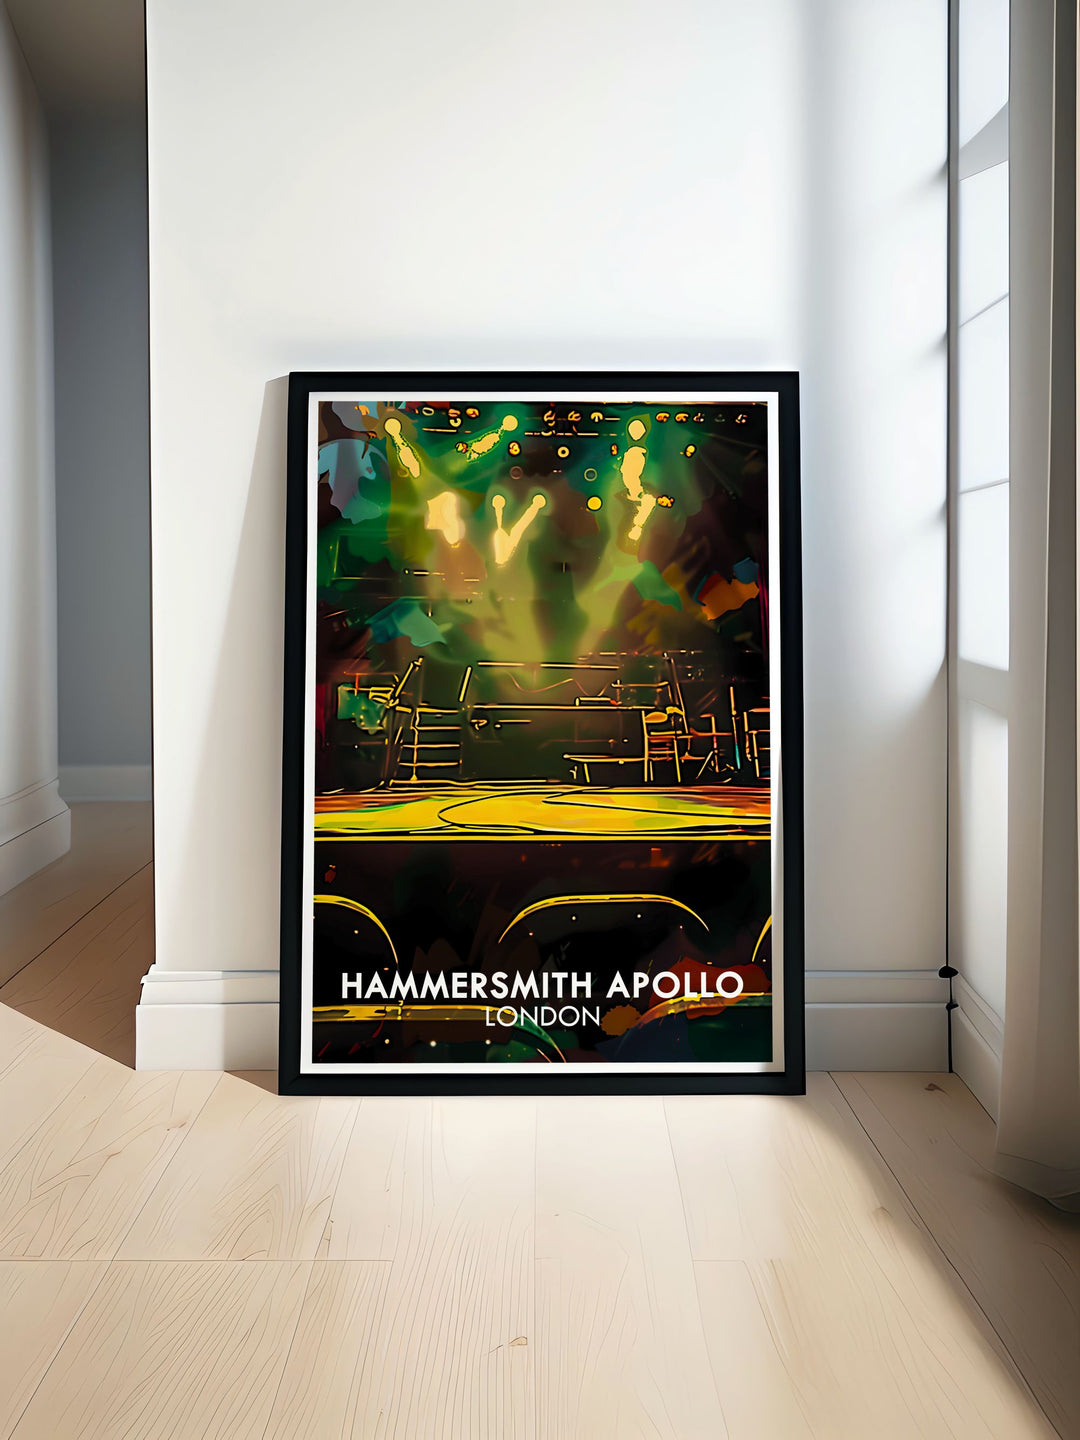 The travel poster of Hammersmith Apollo captures its iconic stage, highlighting the vibrant energy and historical significance of this legendary music venue in London.